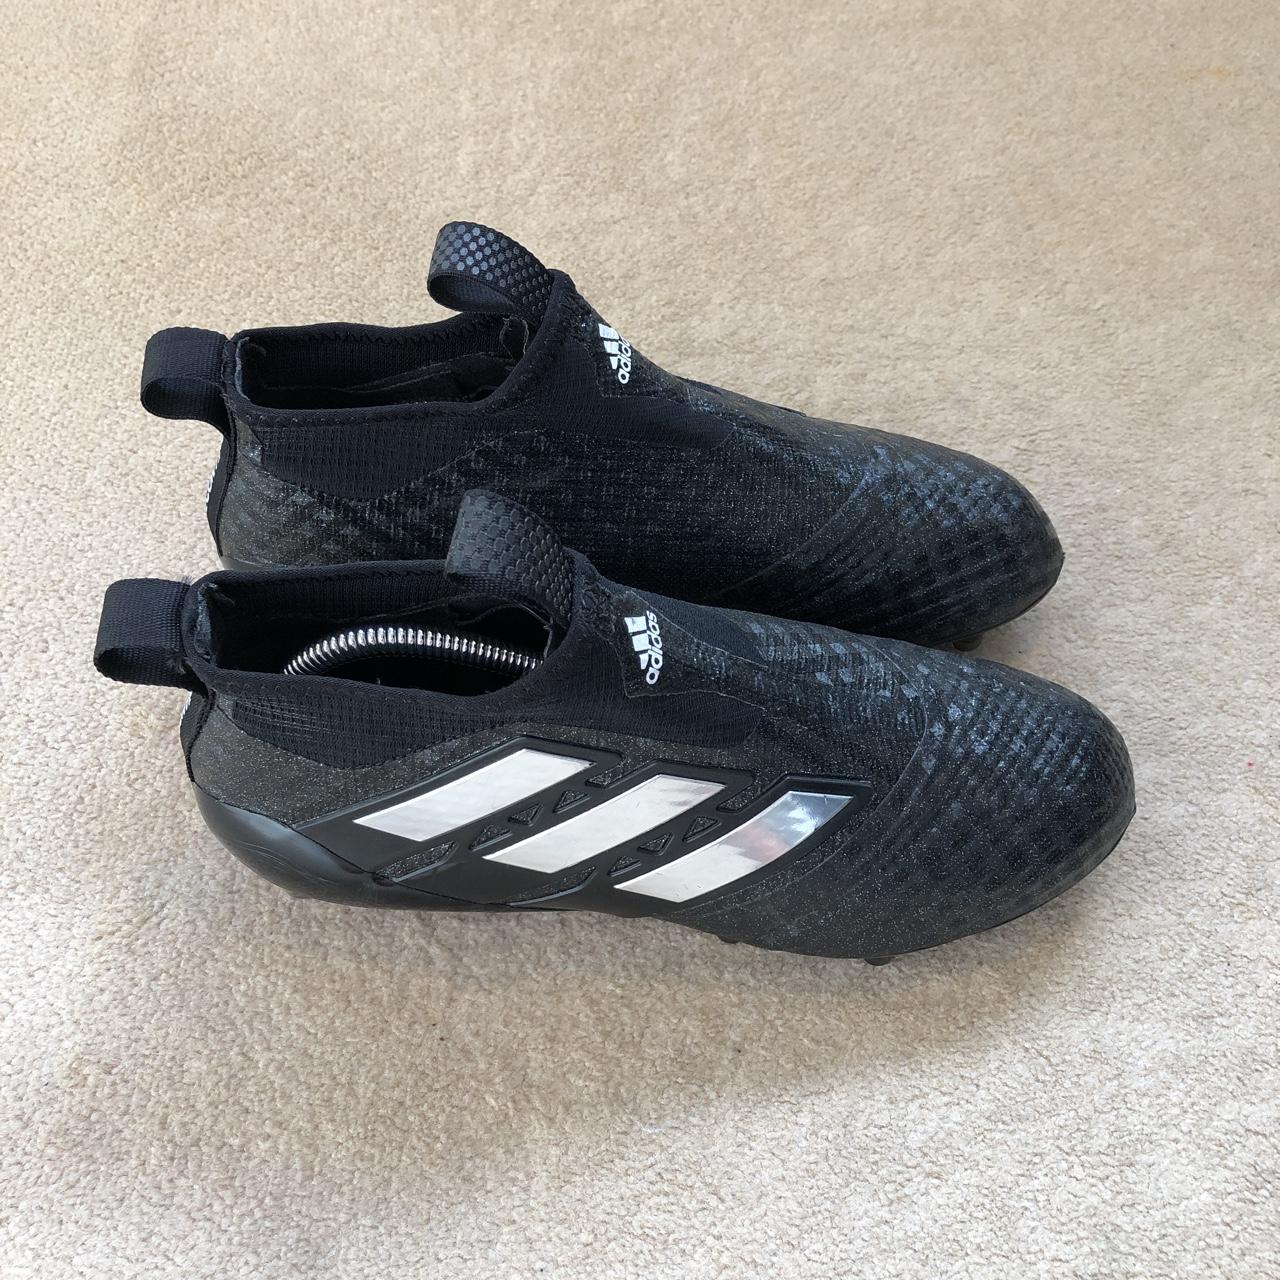 Adidas Ace 17+ PURECONTROL A/G football boots, in... - Depop